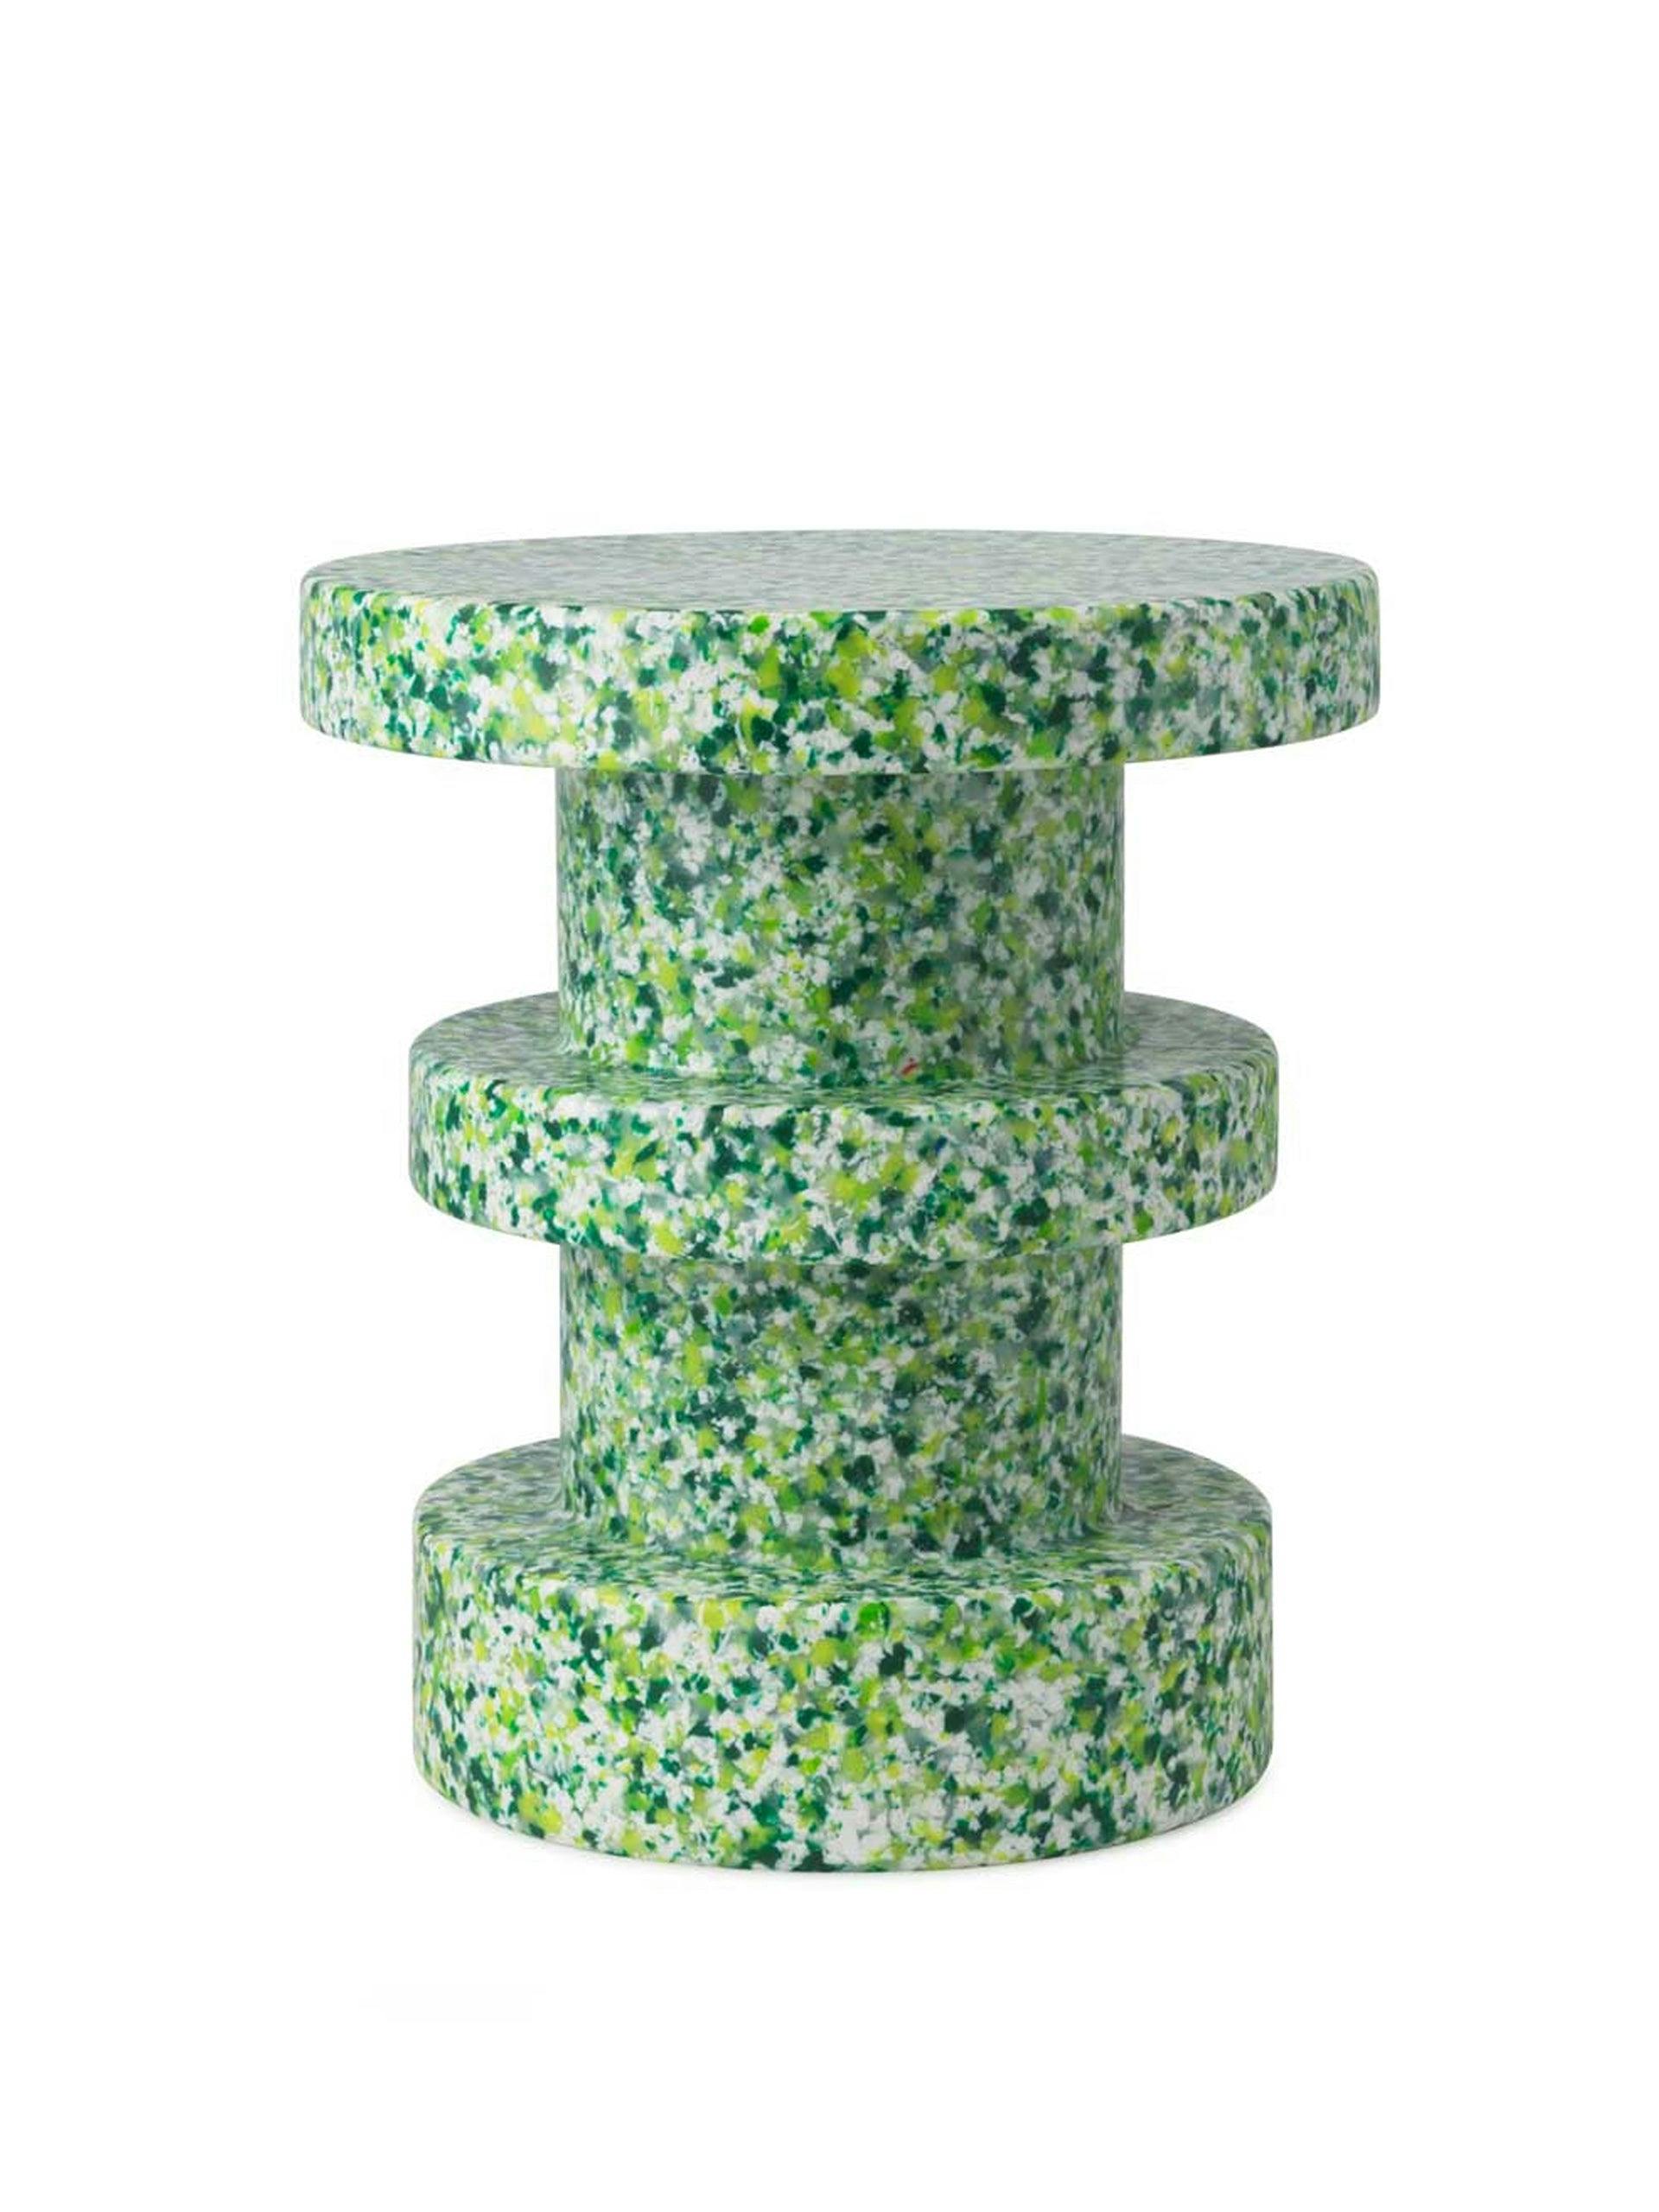 Green stack stool